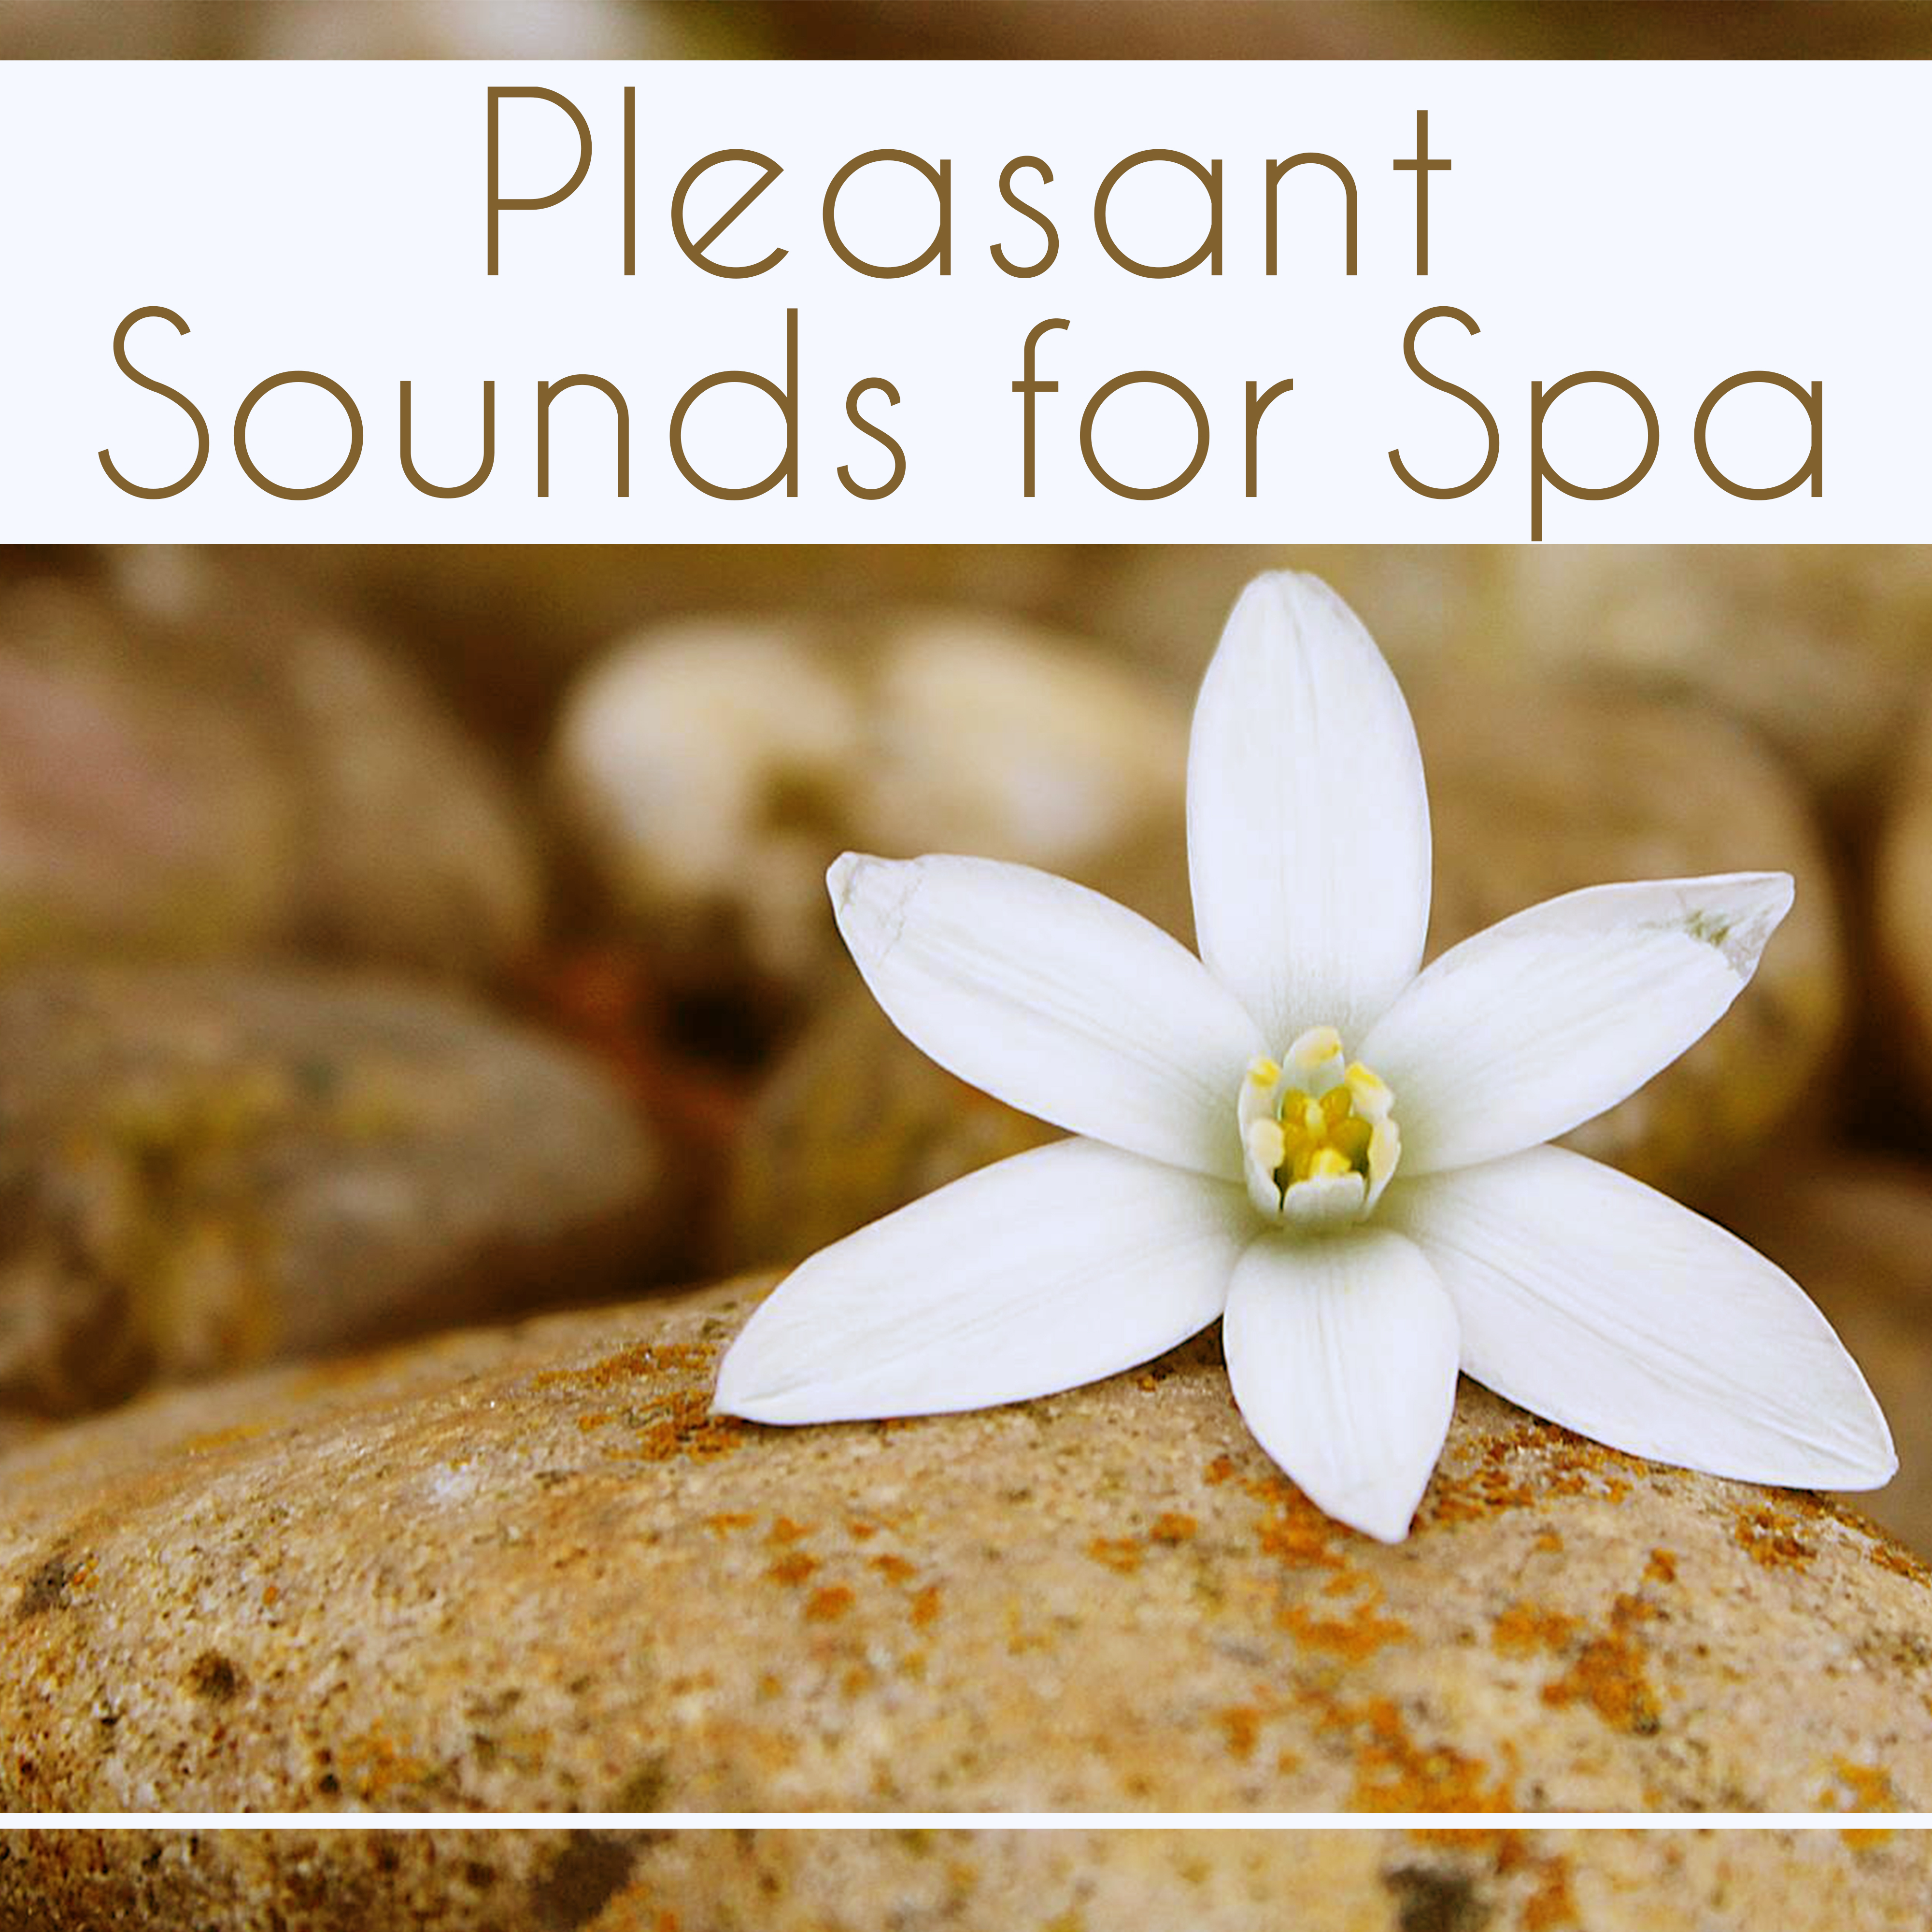 Pleasant Sounds for Spa  Nature Sounds for Relaxation, Deep Massage, Singing Birds, Relaxing Waves, Meditation Spa, Music for Wellness, Calming Melodies